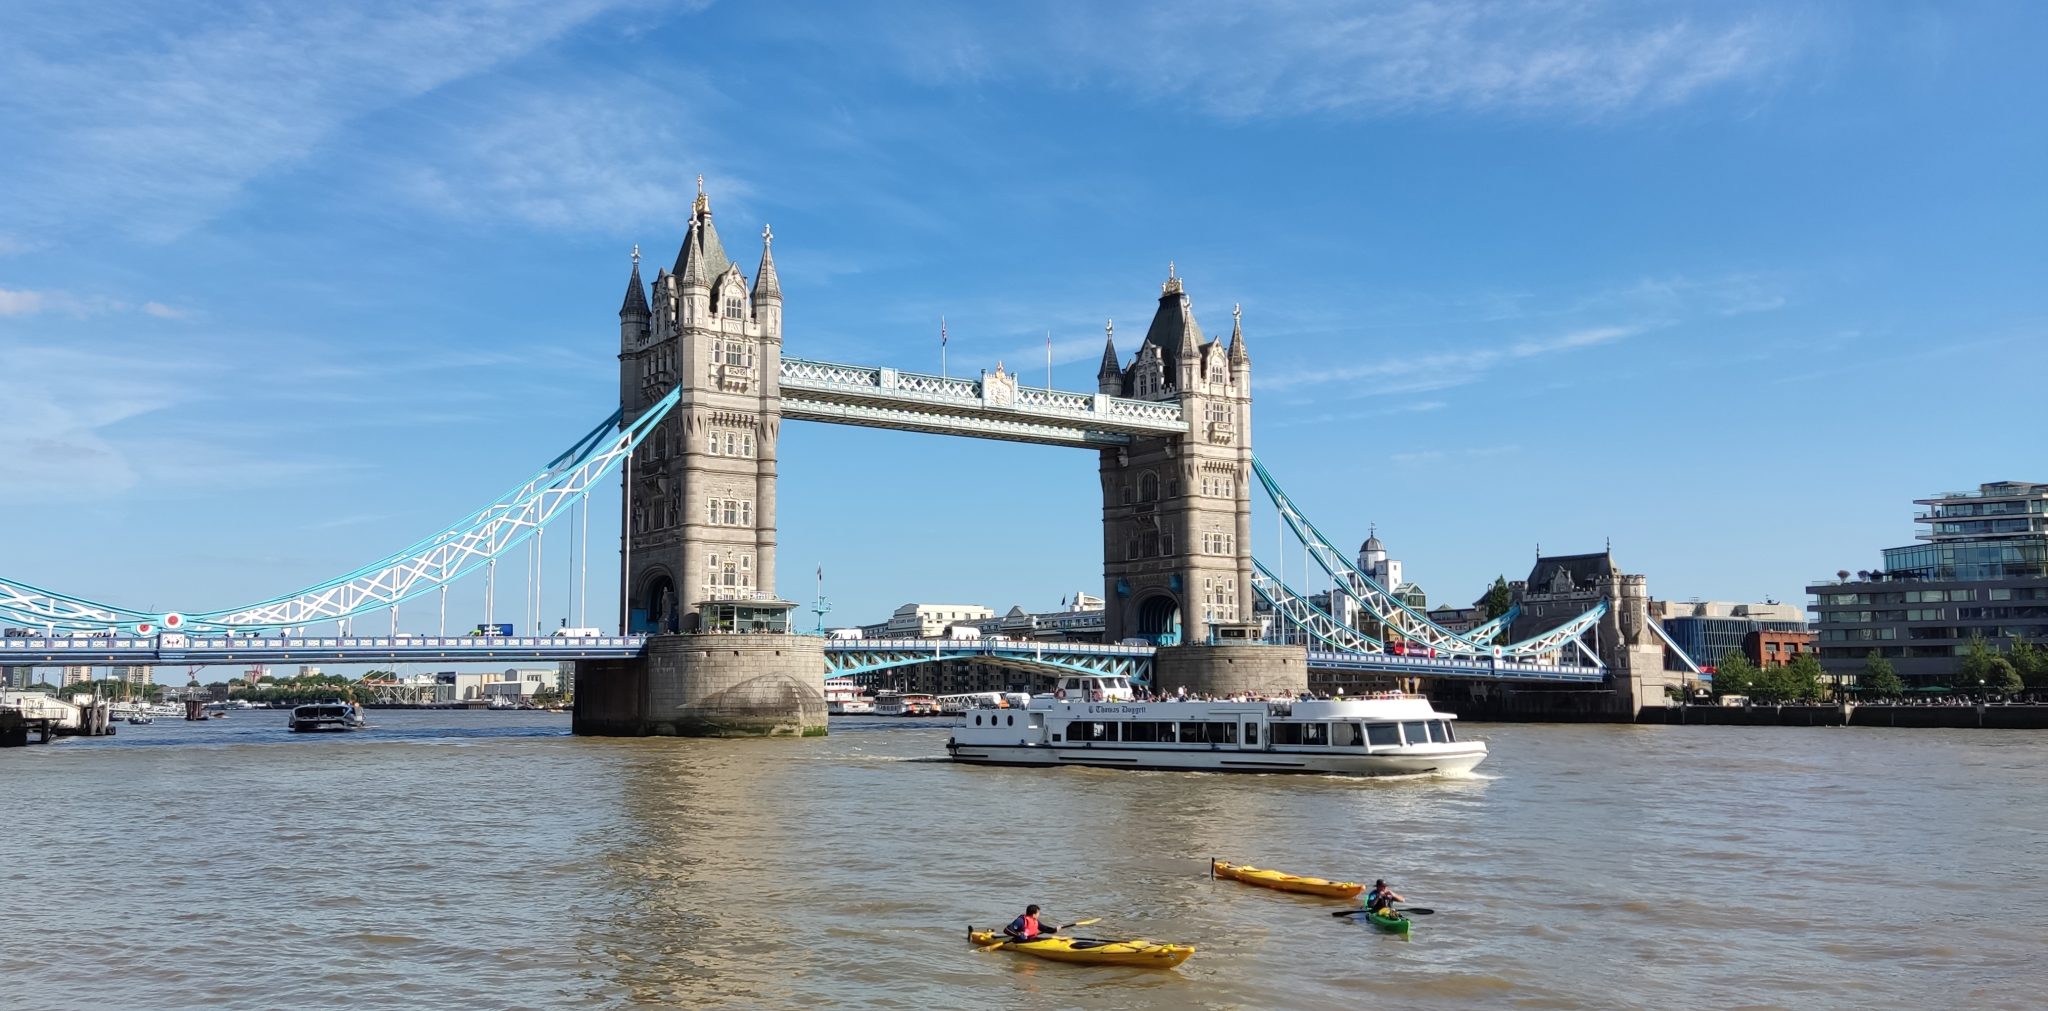 Tower Bridge, London. Photographer is on the water, it's a sunny day, and in the foreground is a large tour boat and two single-person kayaks.